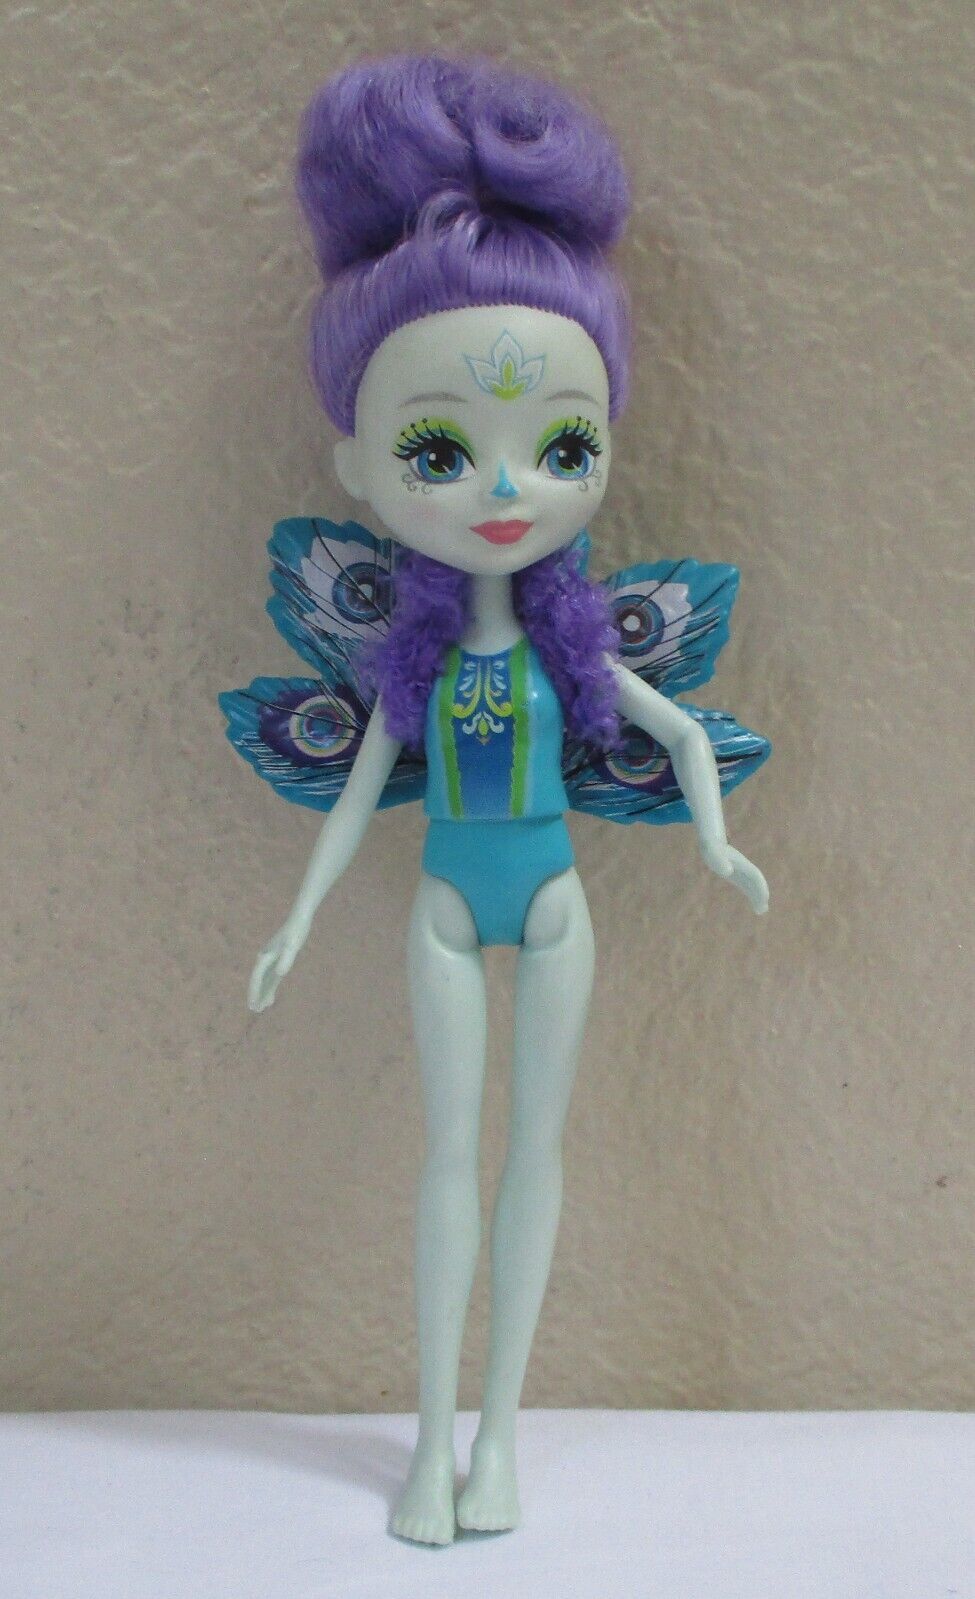 Primary image for Mattel Enchantimals Patter Peacock Doll 7"